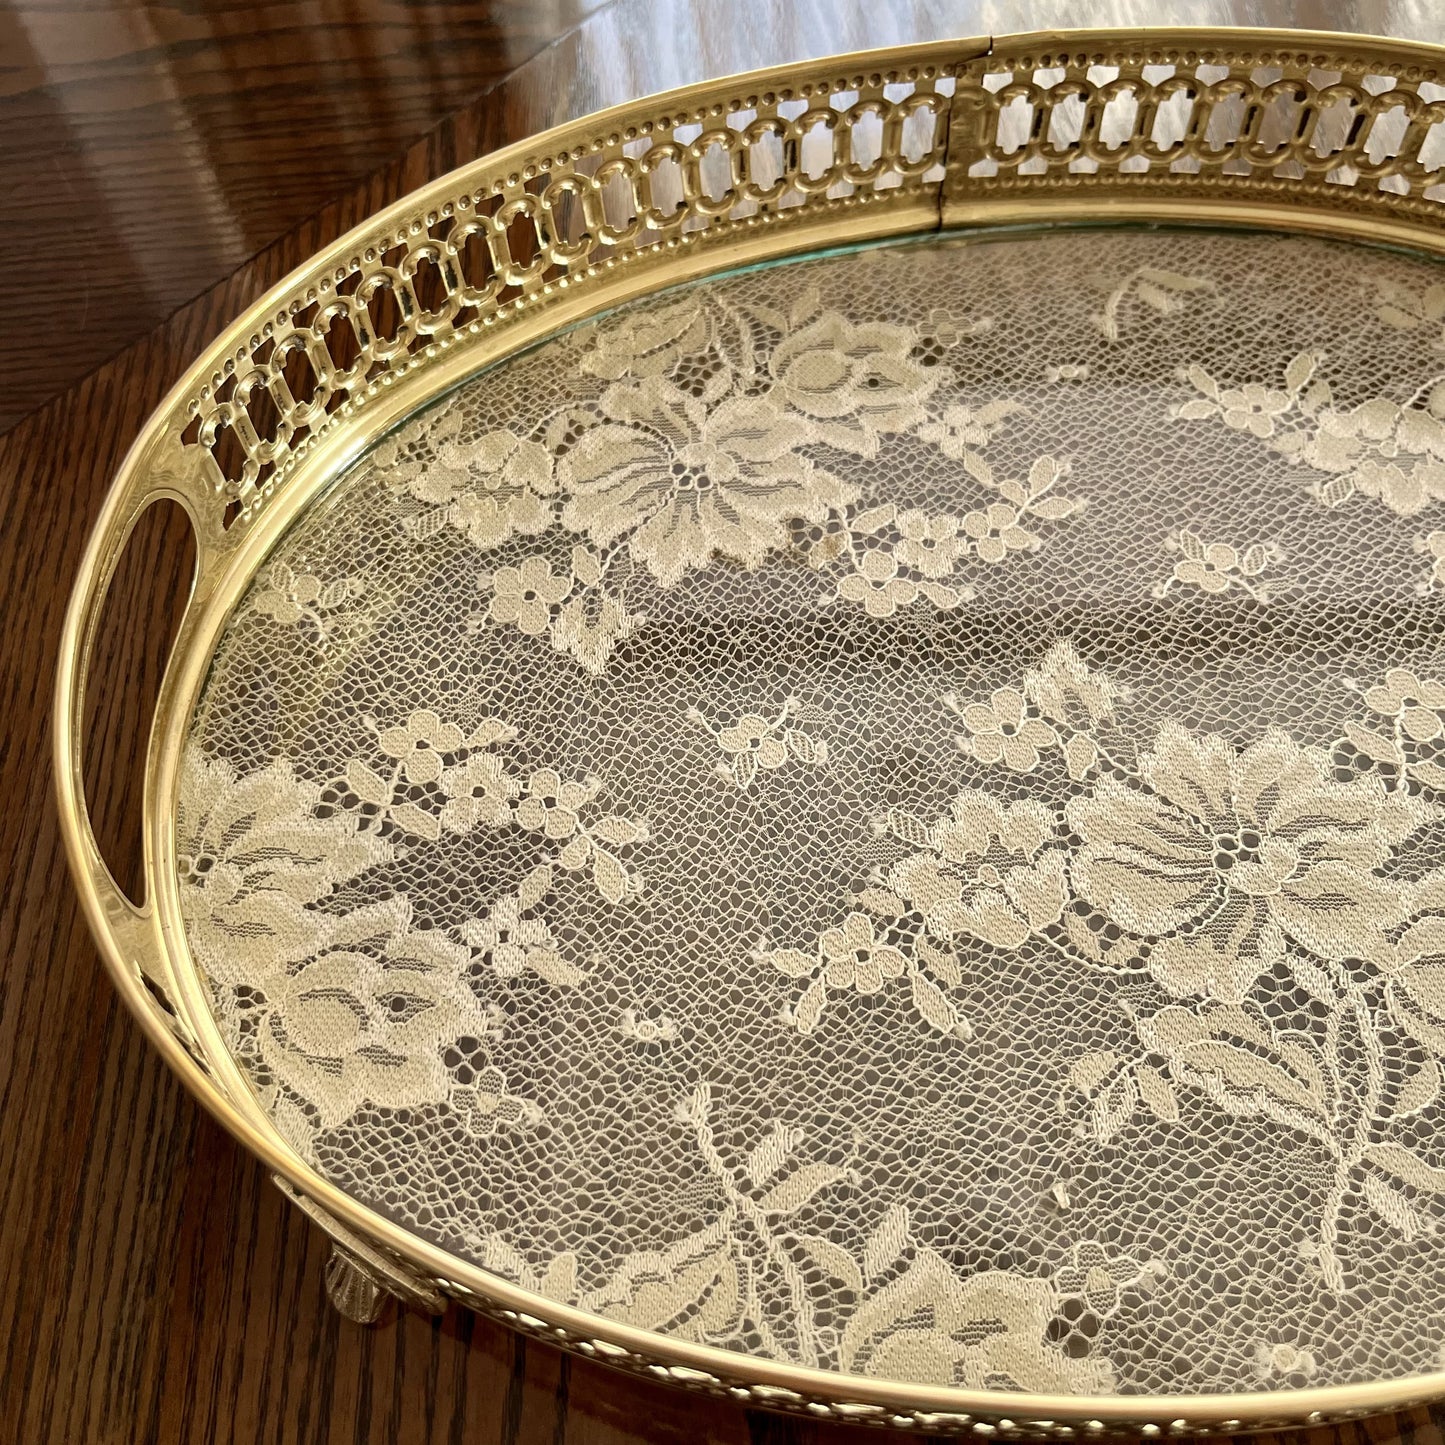 Názm - Brass tray with delicate fabric